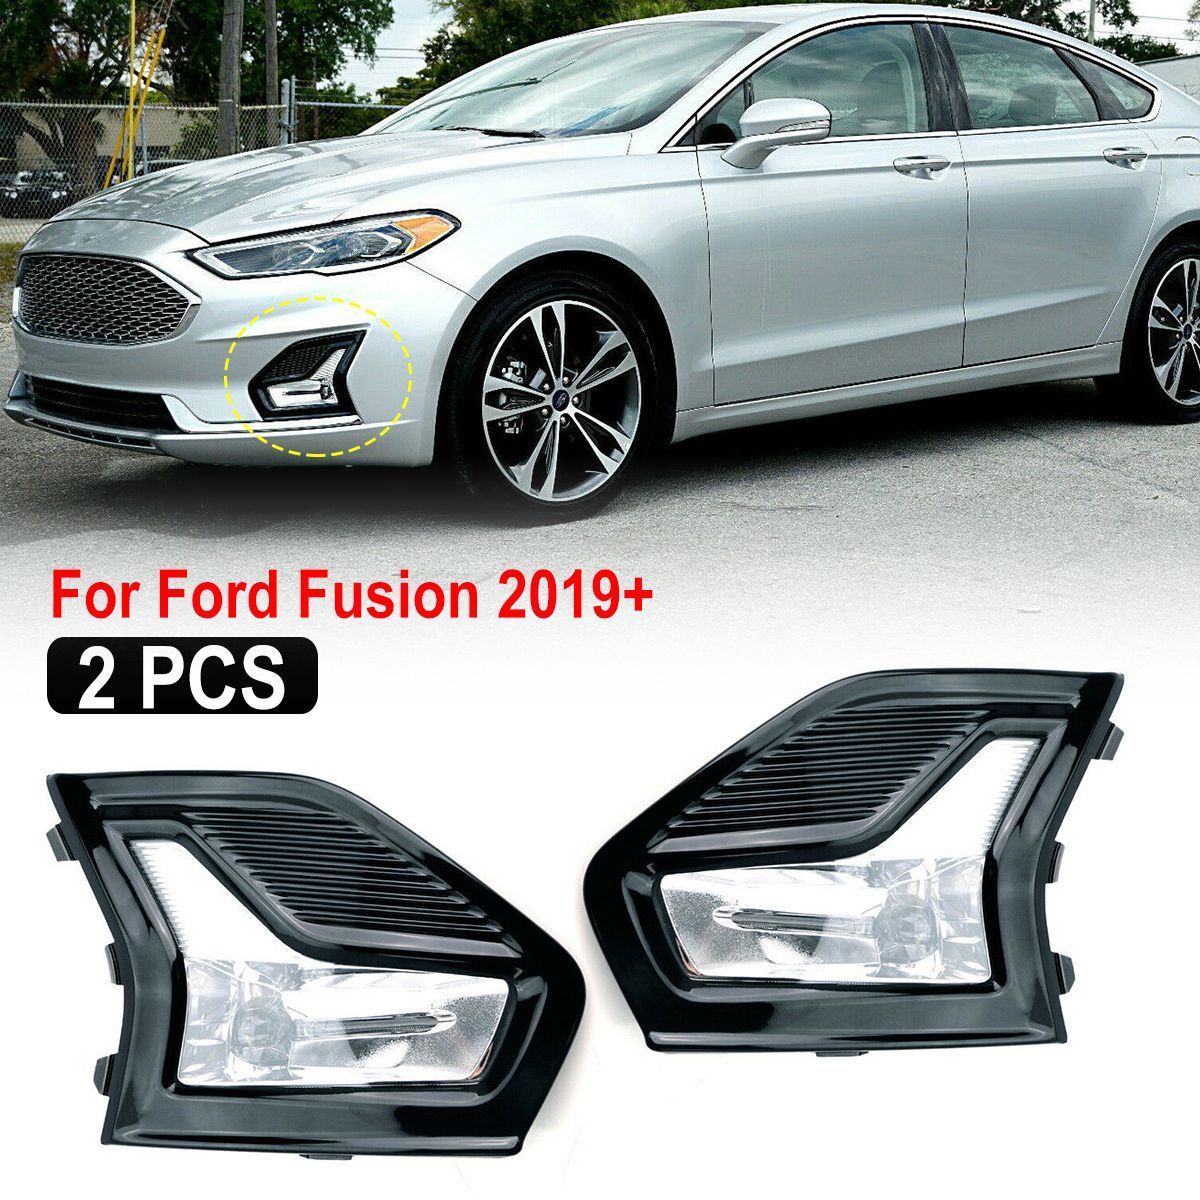 LED-Car-Fog-Lights-Cover-Frame-Harness-For-Ford-Fusion-2019-Front-Bumper-Driving-Lamp-1656436